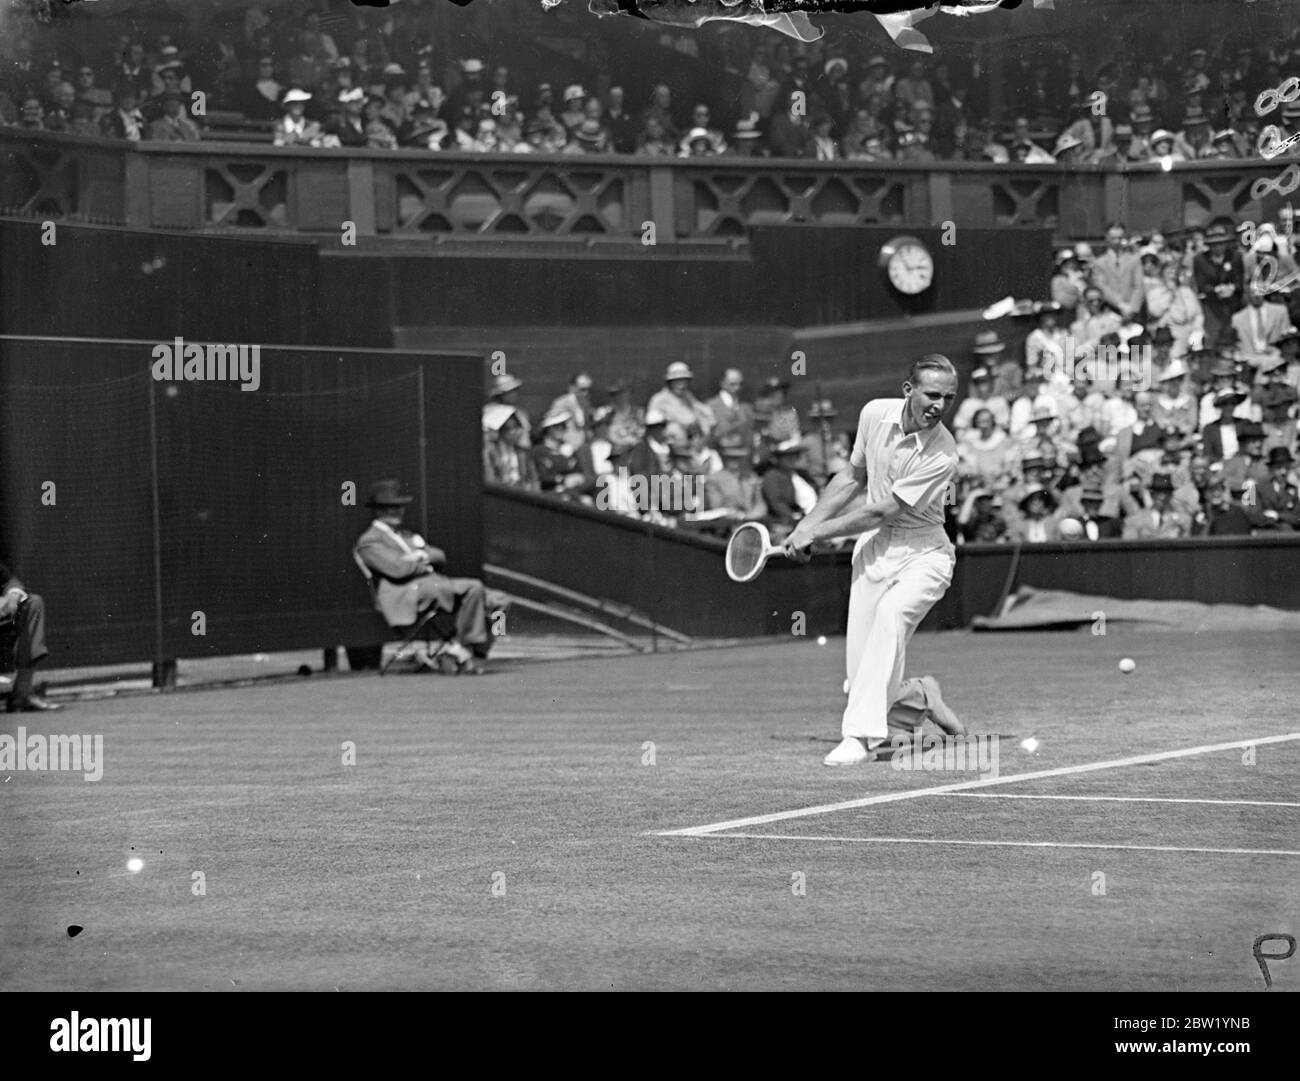 Double handed play at Wimbledon, Australian style in singles match. J Bromwich, the Australian player, makes a double handed stroke during his match on the Centre Court with V G Kirby, the South African, in the men's singles of the all England Championships at Wimbledon. 23 June 1937 Stock Photo